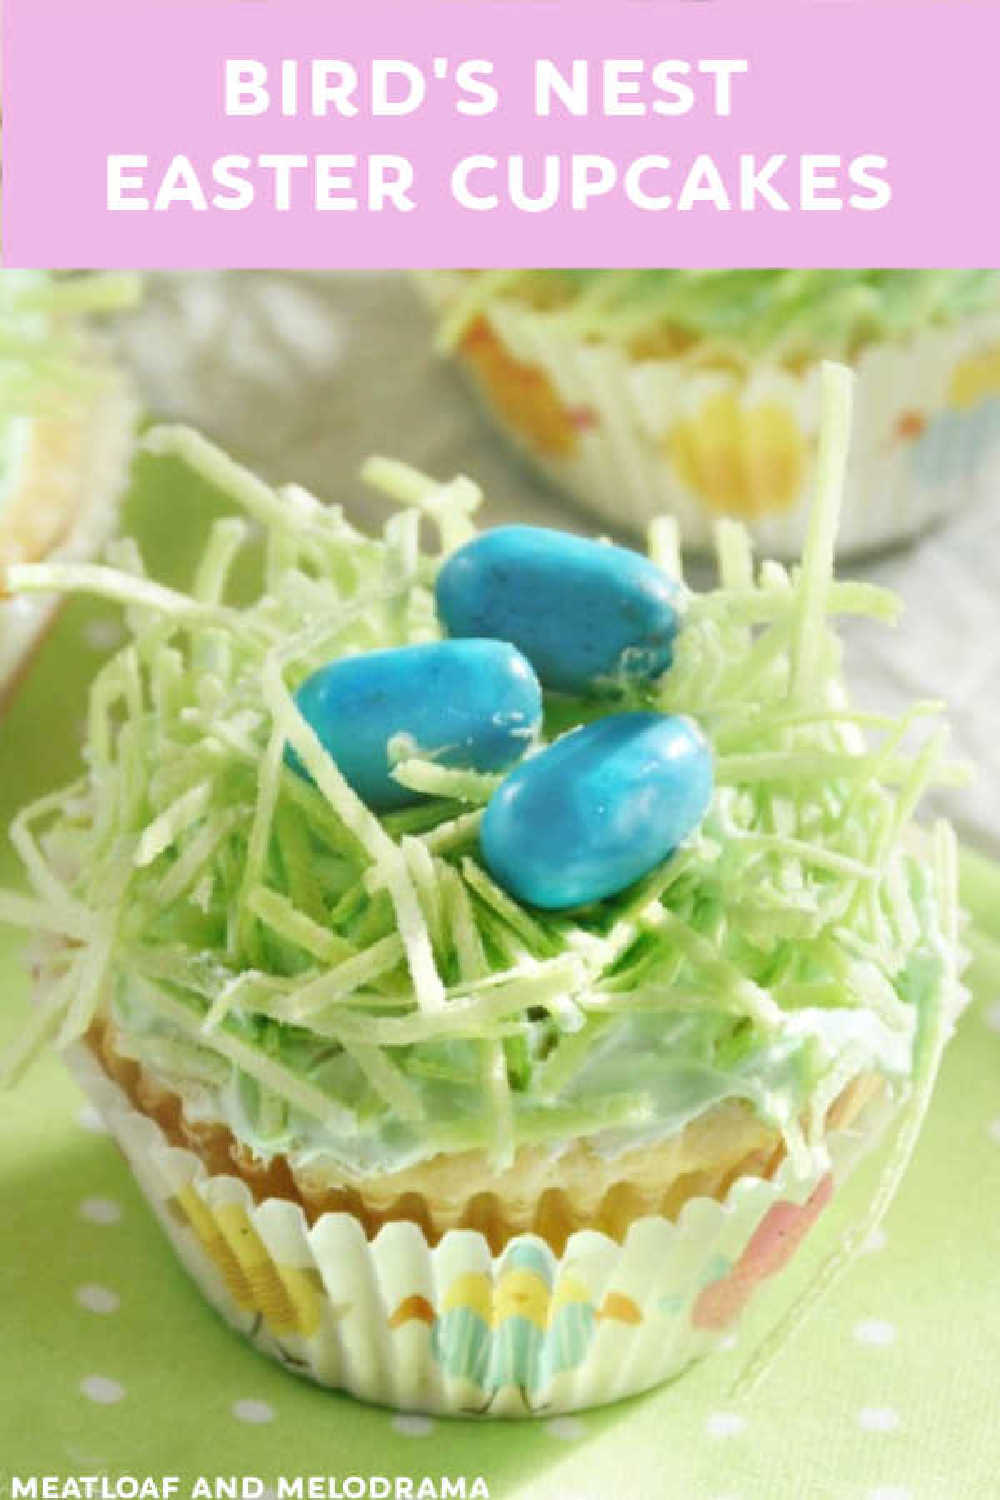 Bird's Nest Easter Cupcakes topped with edible grass and chocolate candy eggs are perfect for an easy Easter dessert or spring celebration! Kids of all ages love this easy dessert! via @meamel